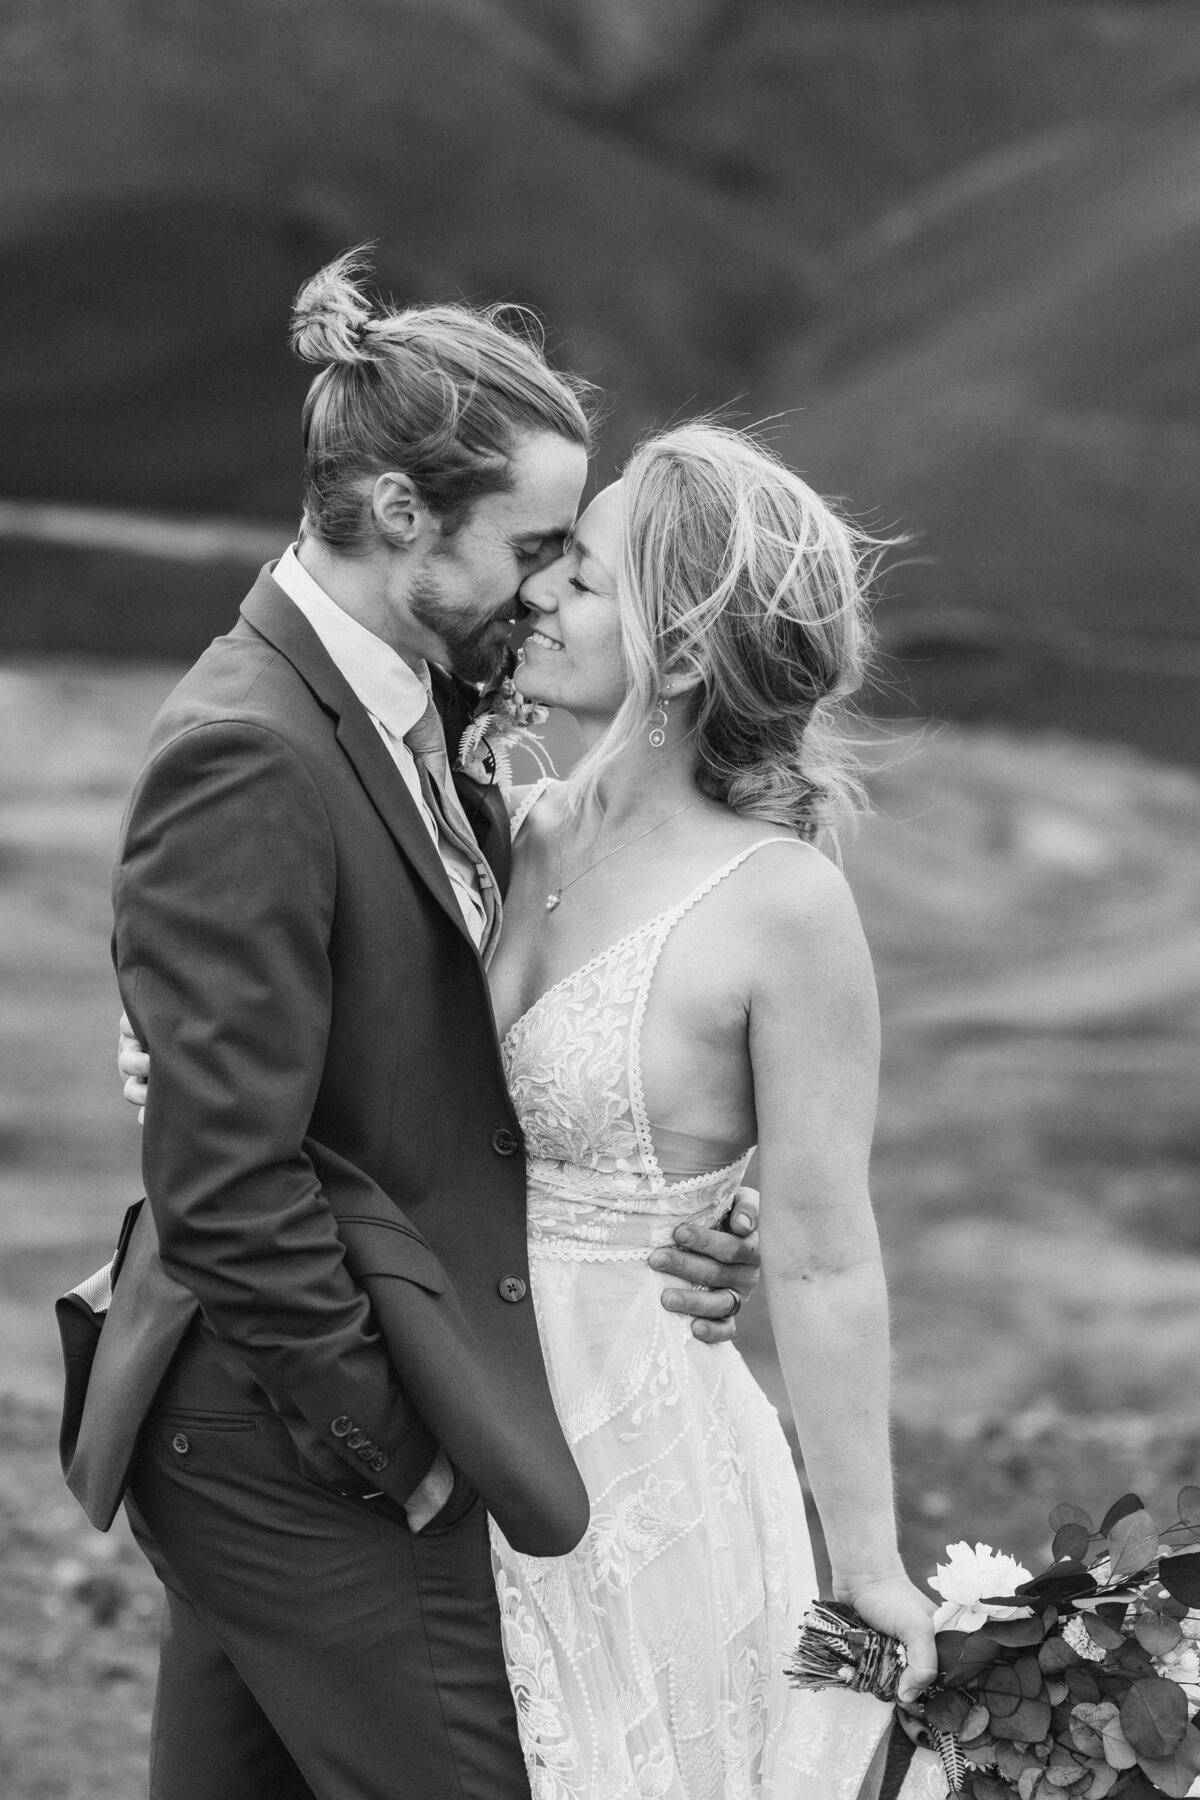 Black and white image of a couple on their wedding day about to kiss each other with their hair blowing in the wind.